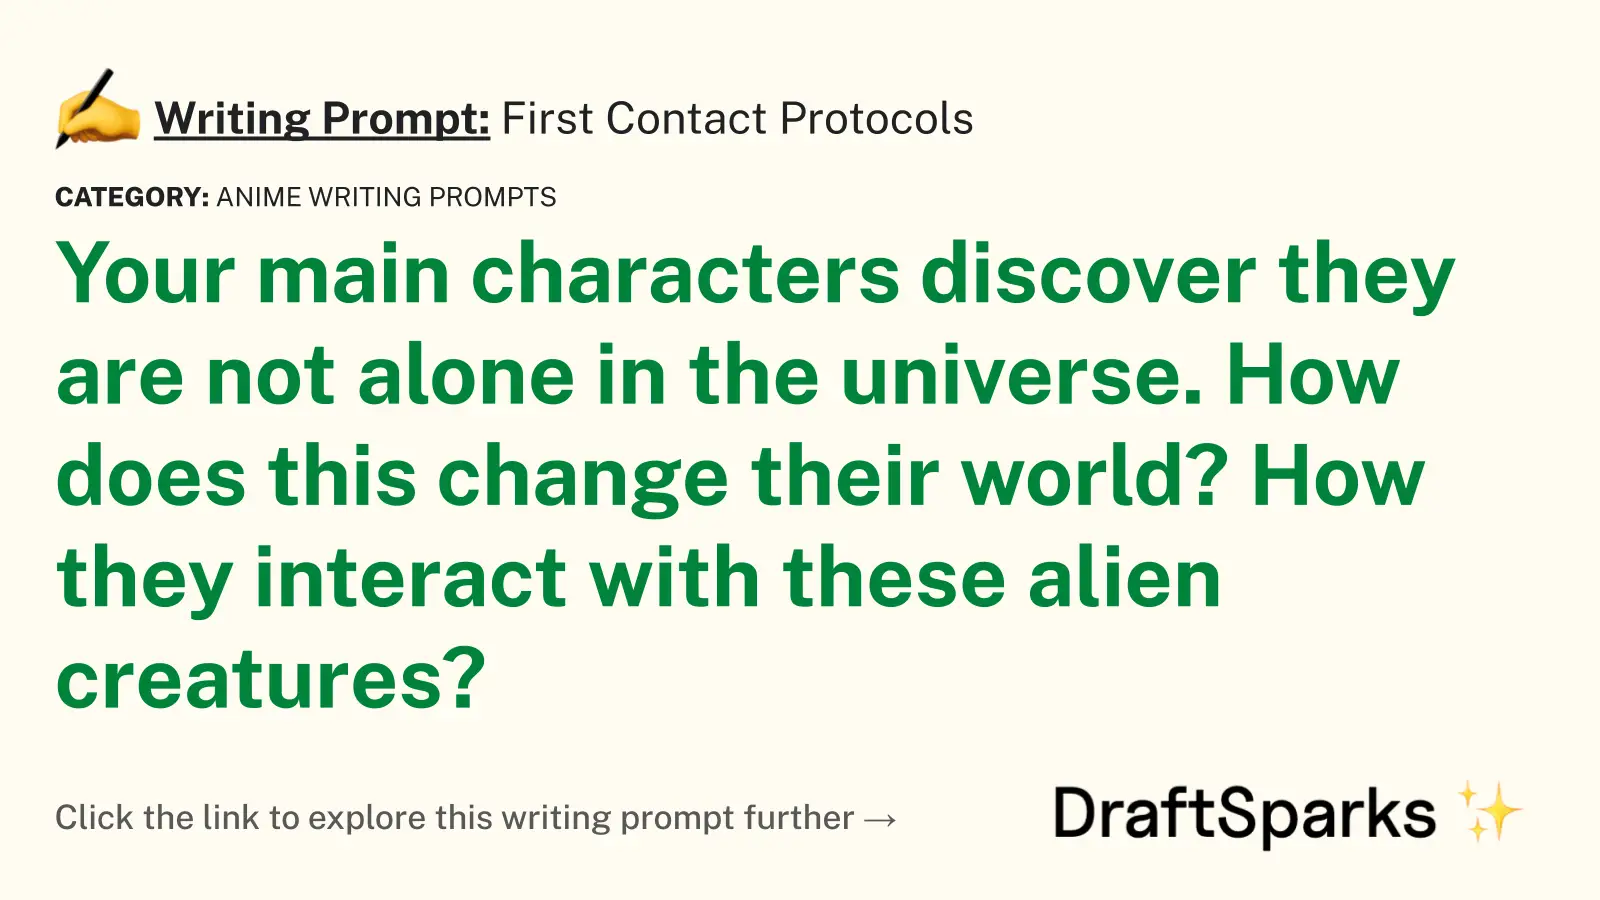 First Contact Protocols